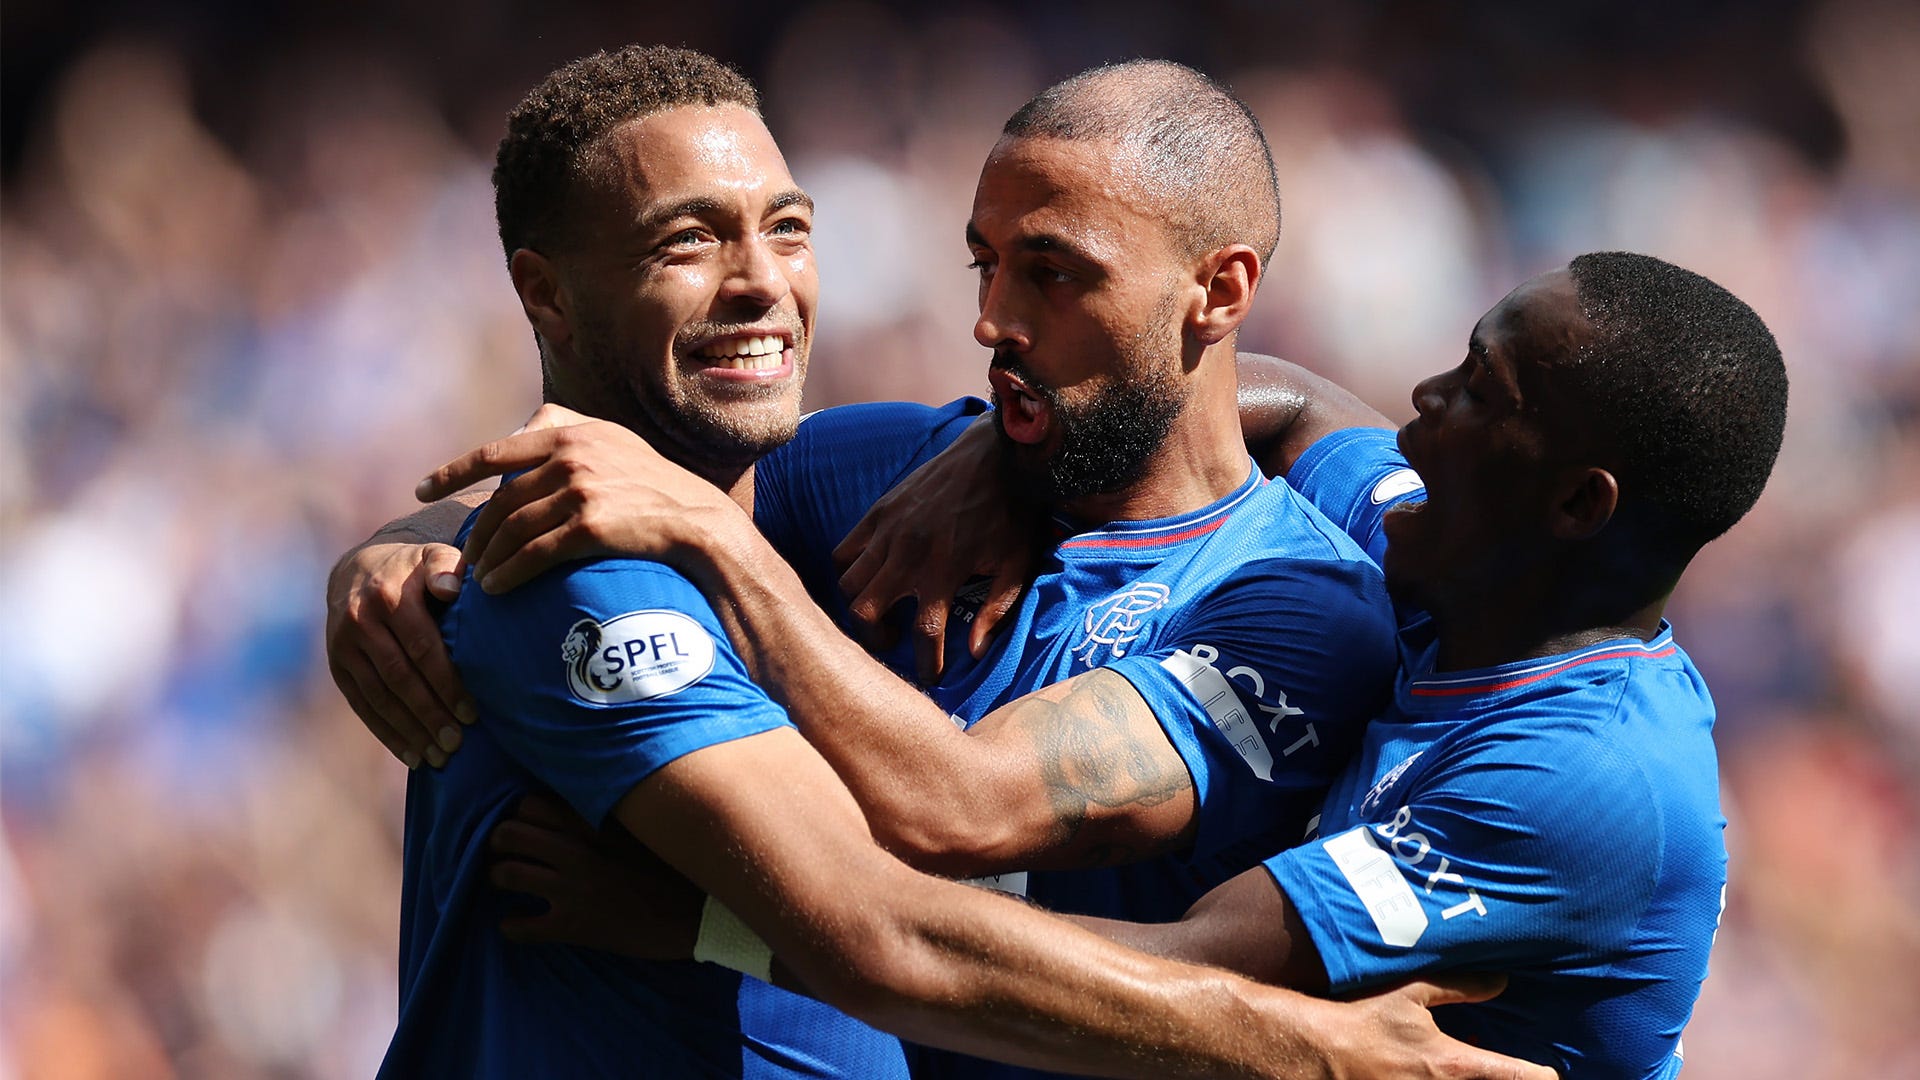 How to watch Rangers v Aris Limassol in the UEFA Europa League on